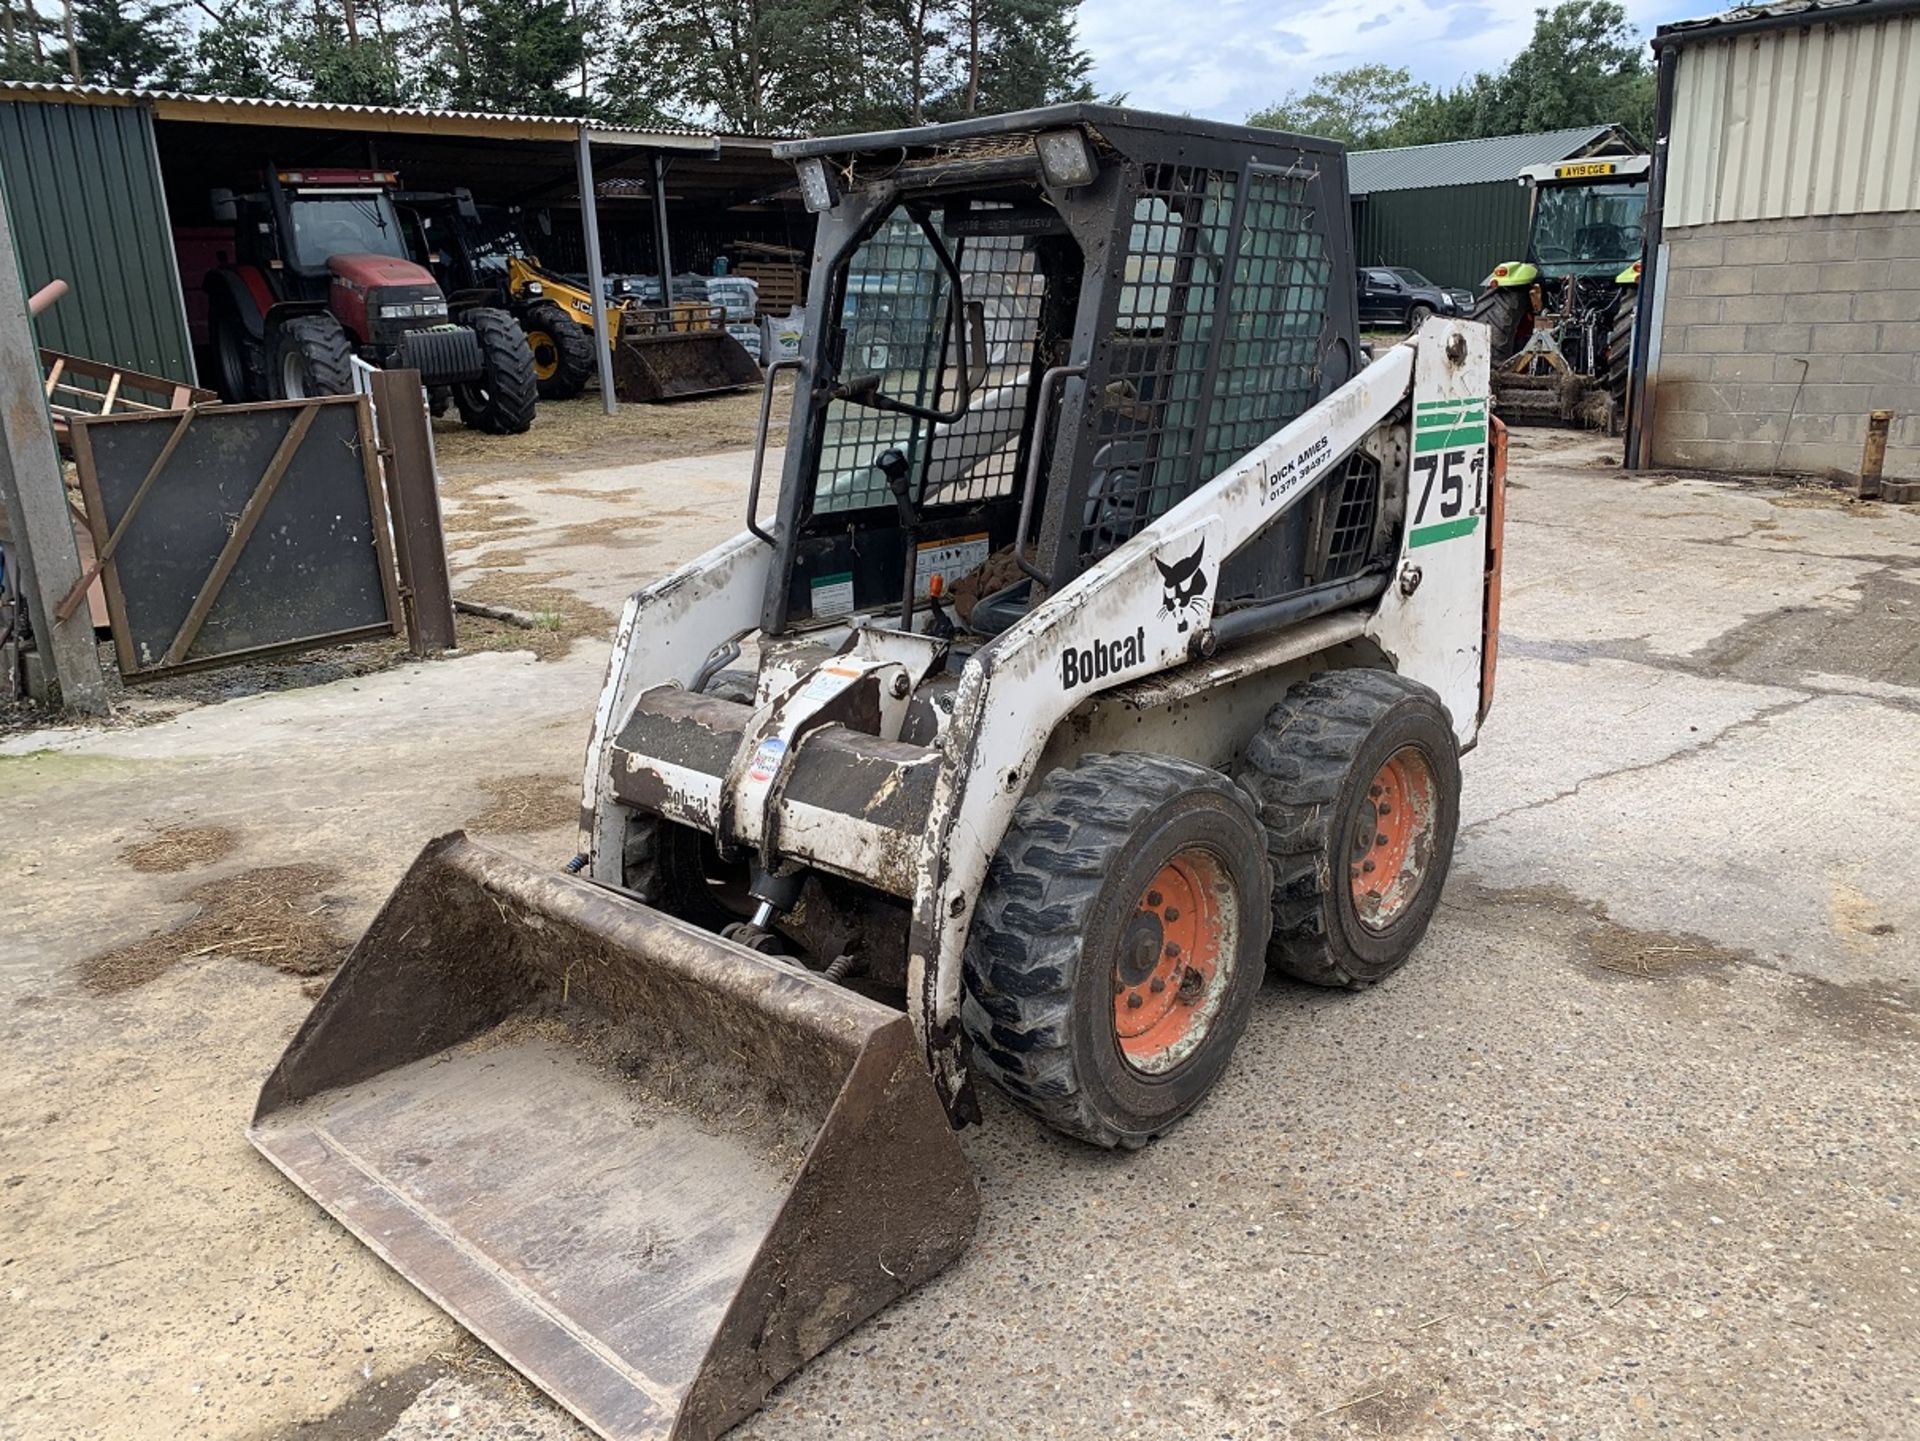 Bobcat 751 compact skid steer (1999), Rebuilt Engine in March 2020, Comes with Spare wheel, - Image 2 of 7